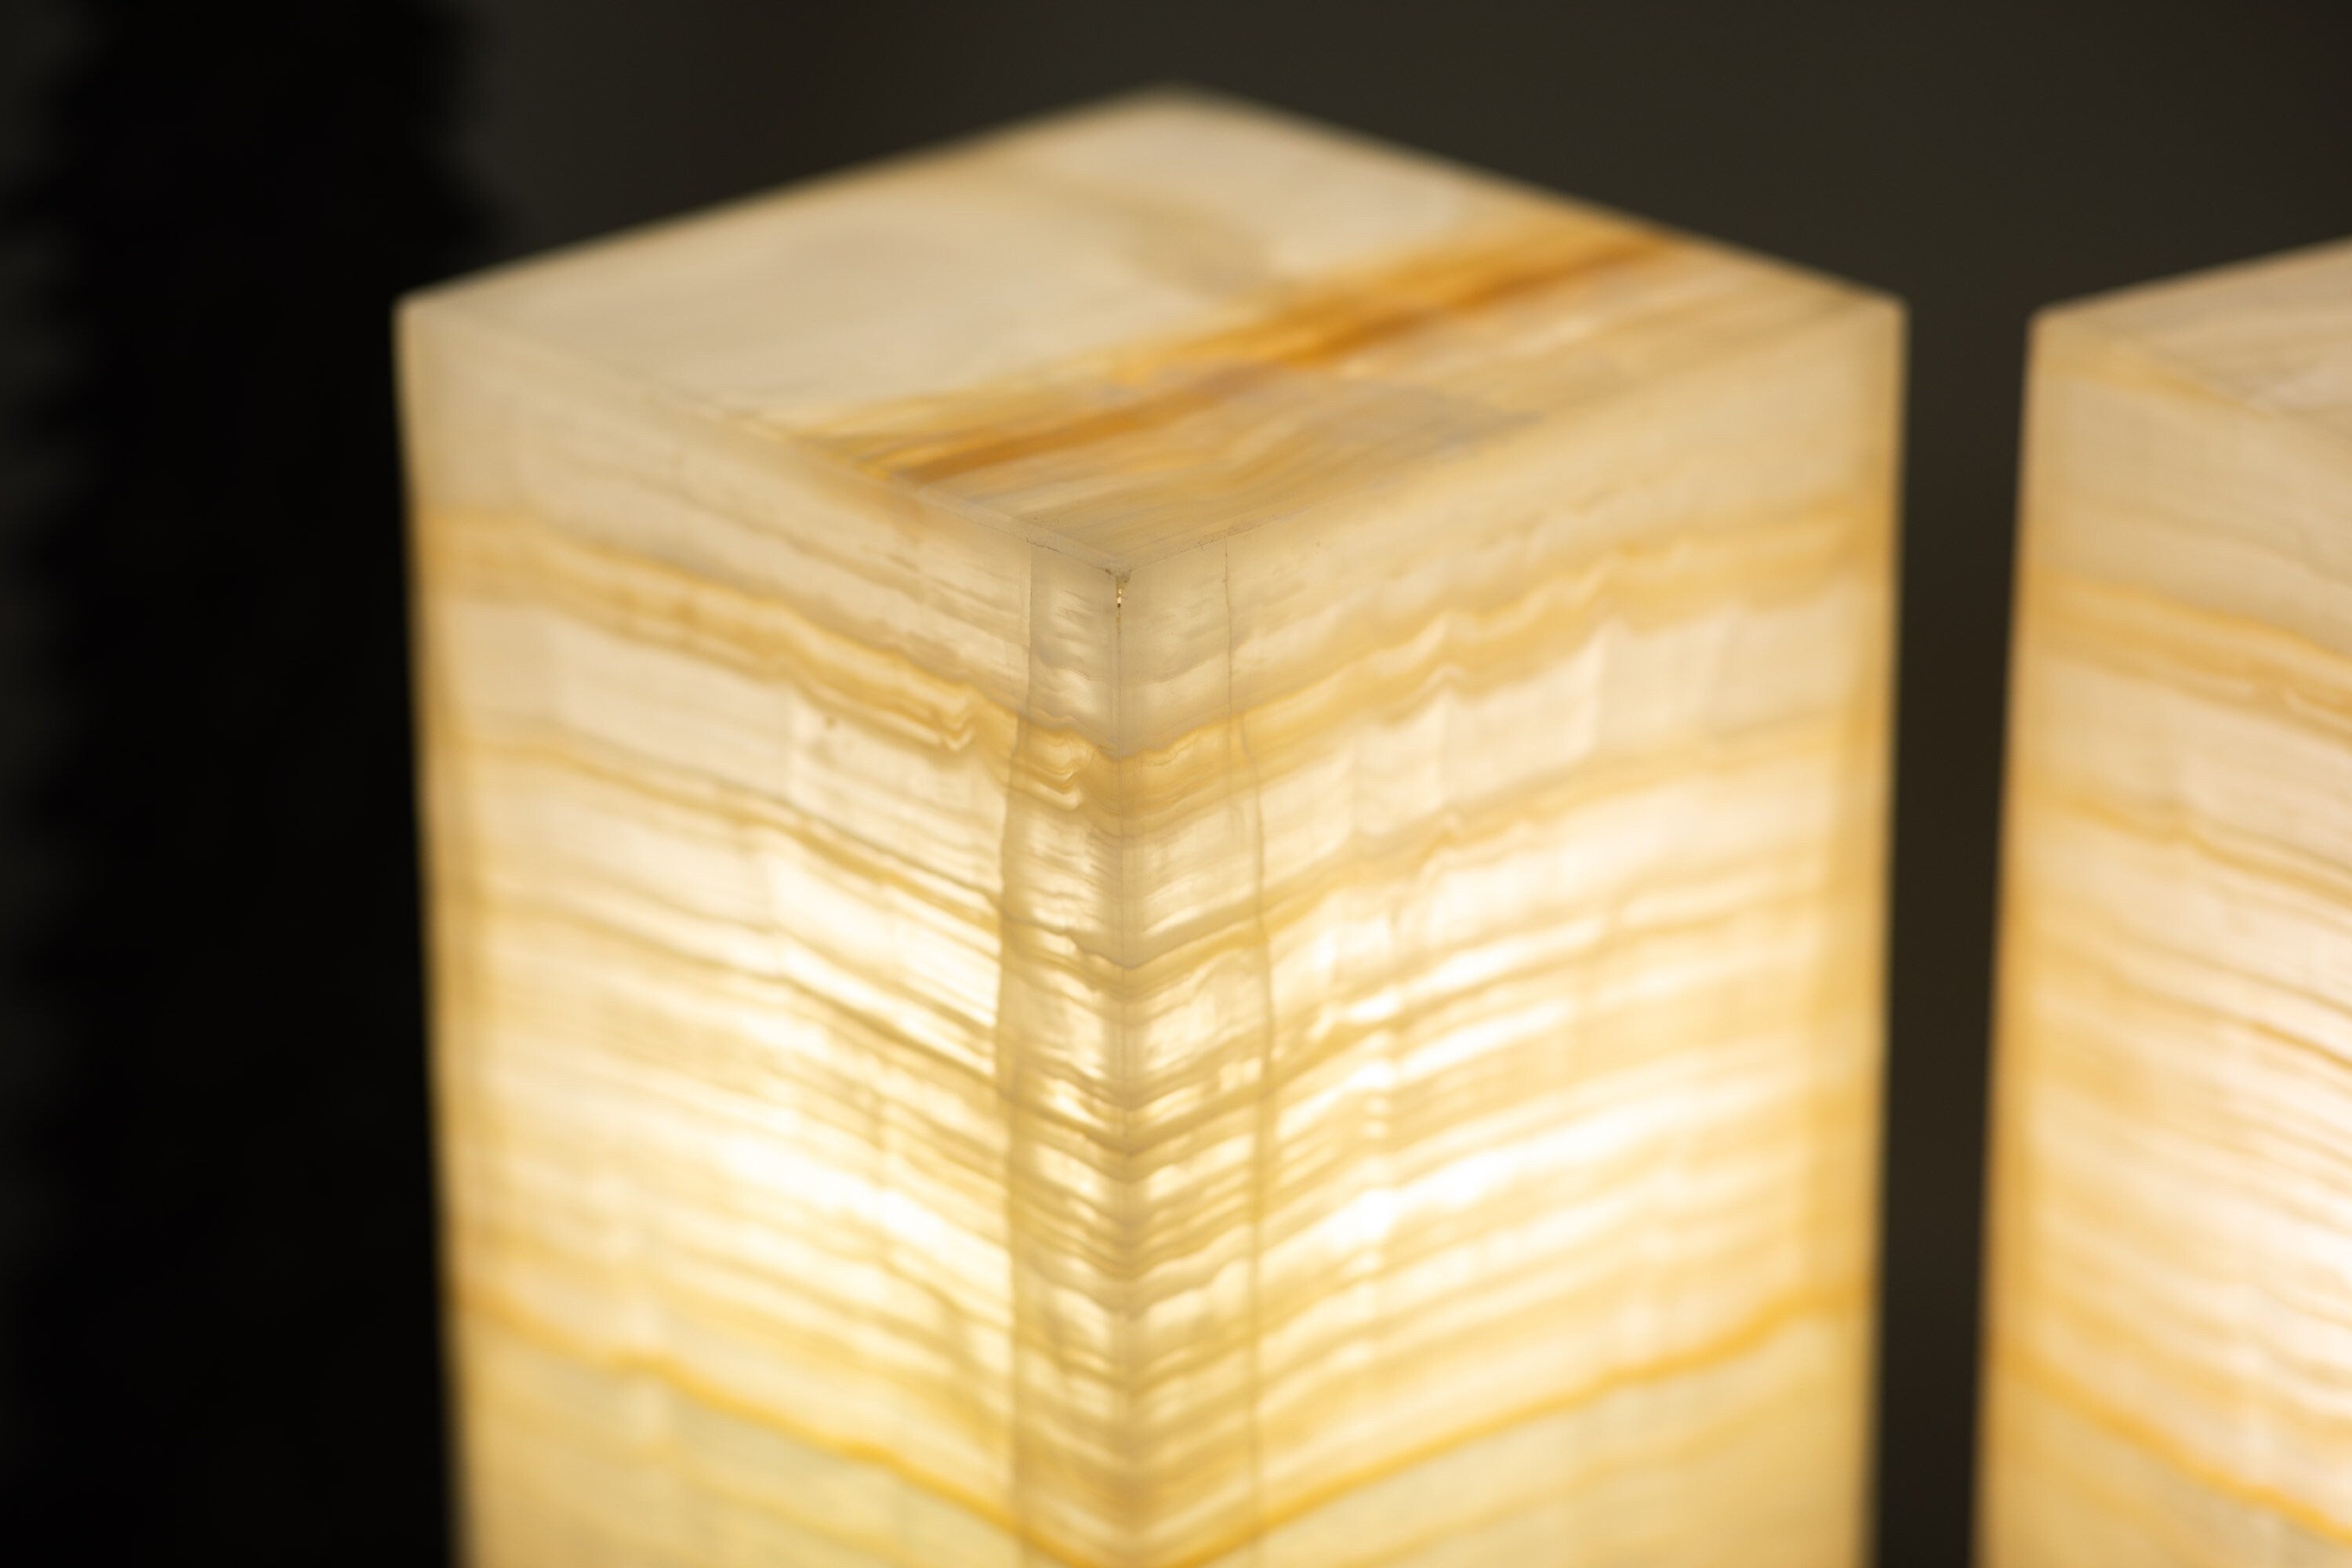 Contemporary Amber Onyx Lamp Set - Geometric Shape - 12 Inches - Ideal for Holiday Decor